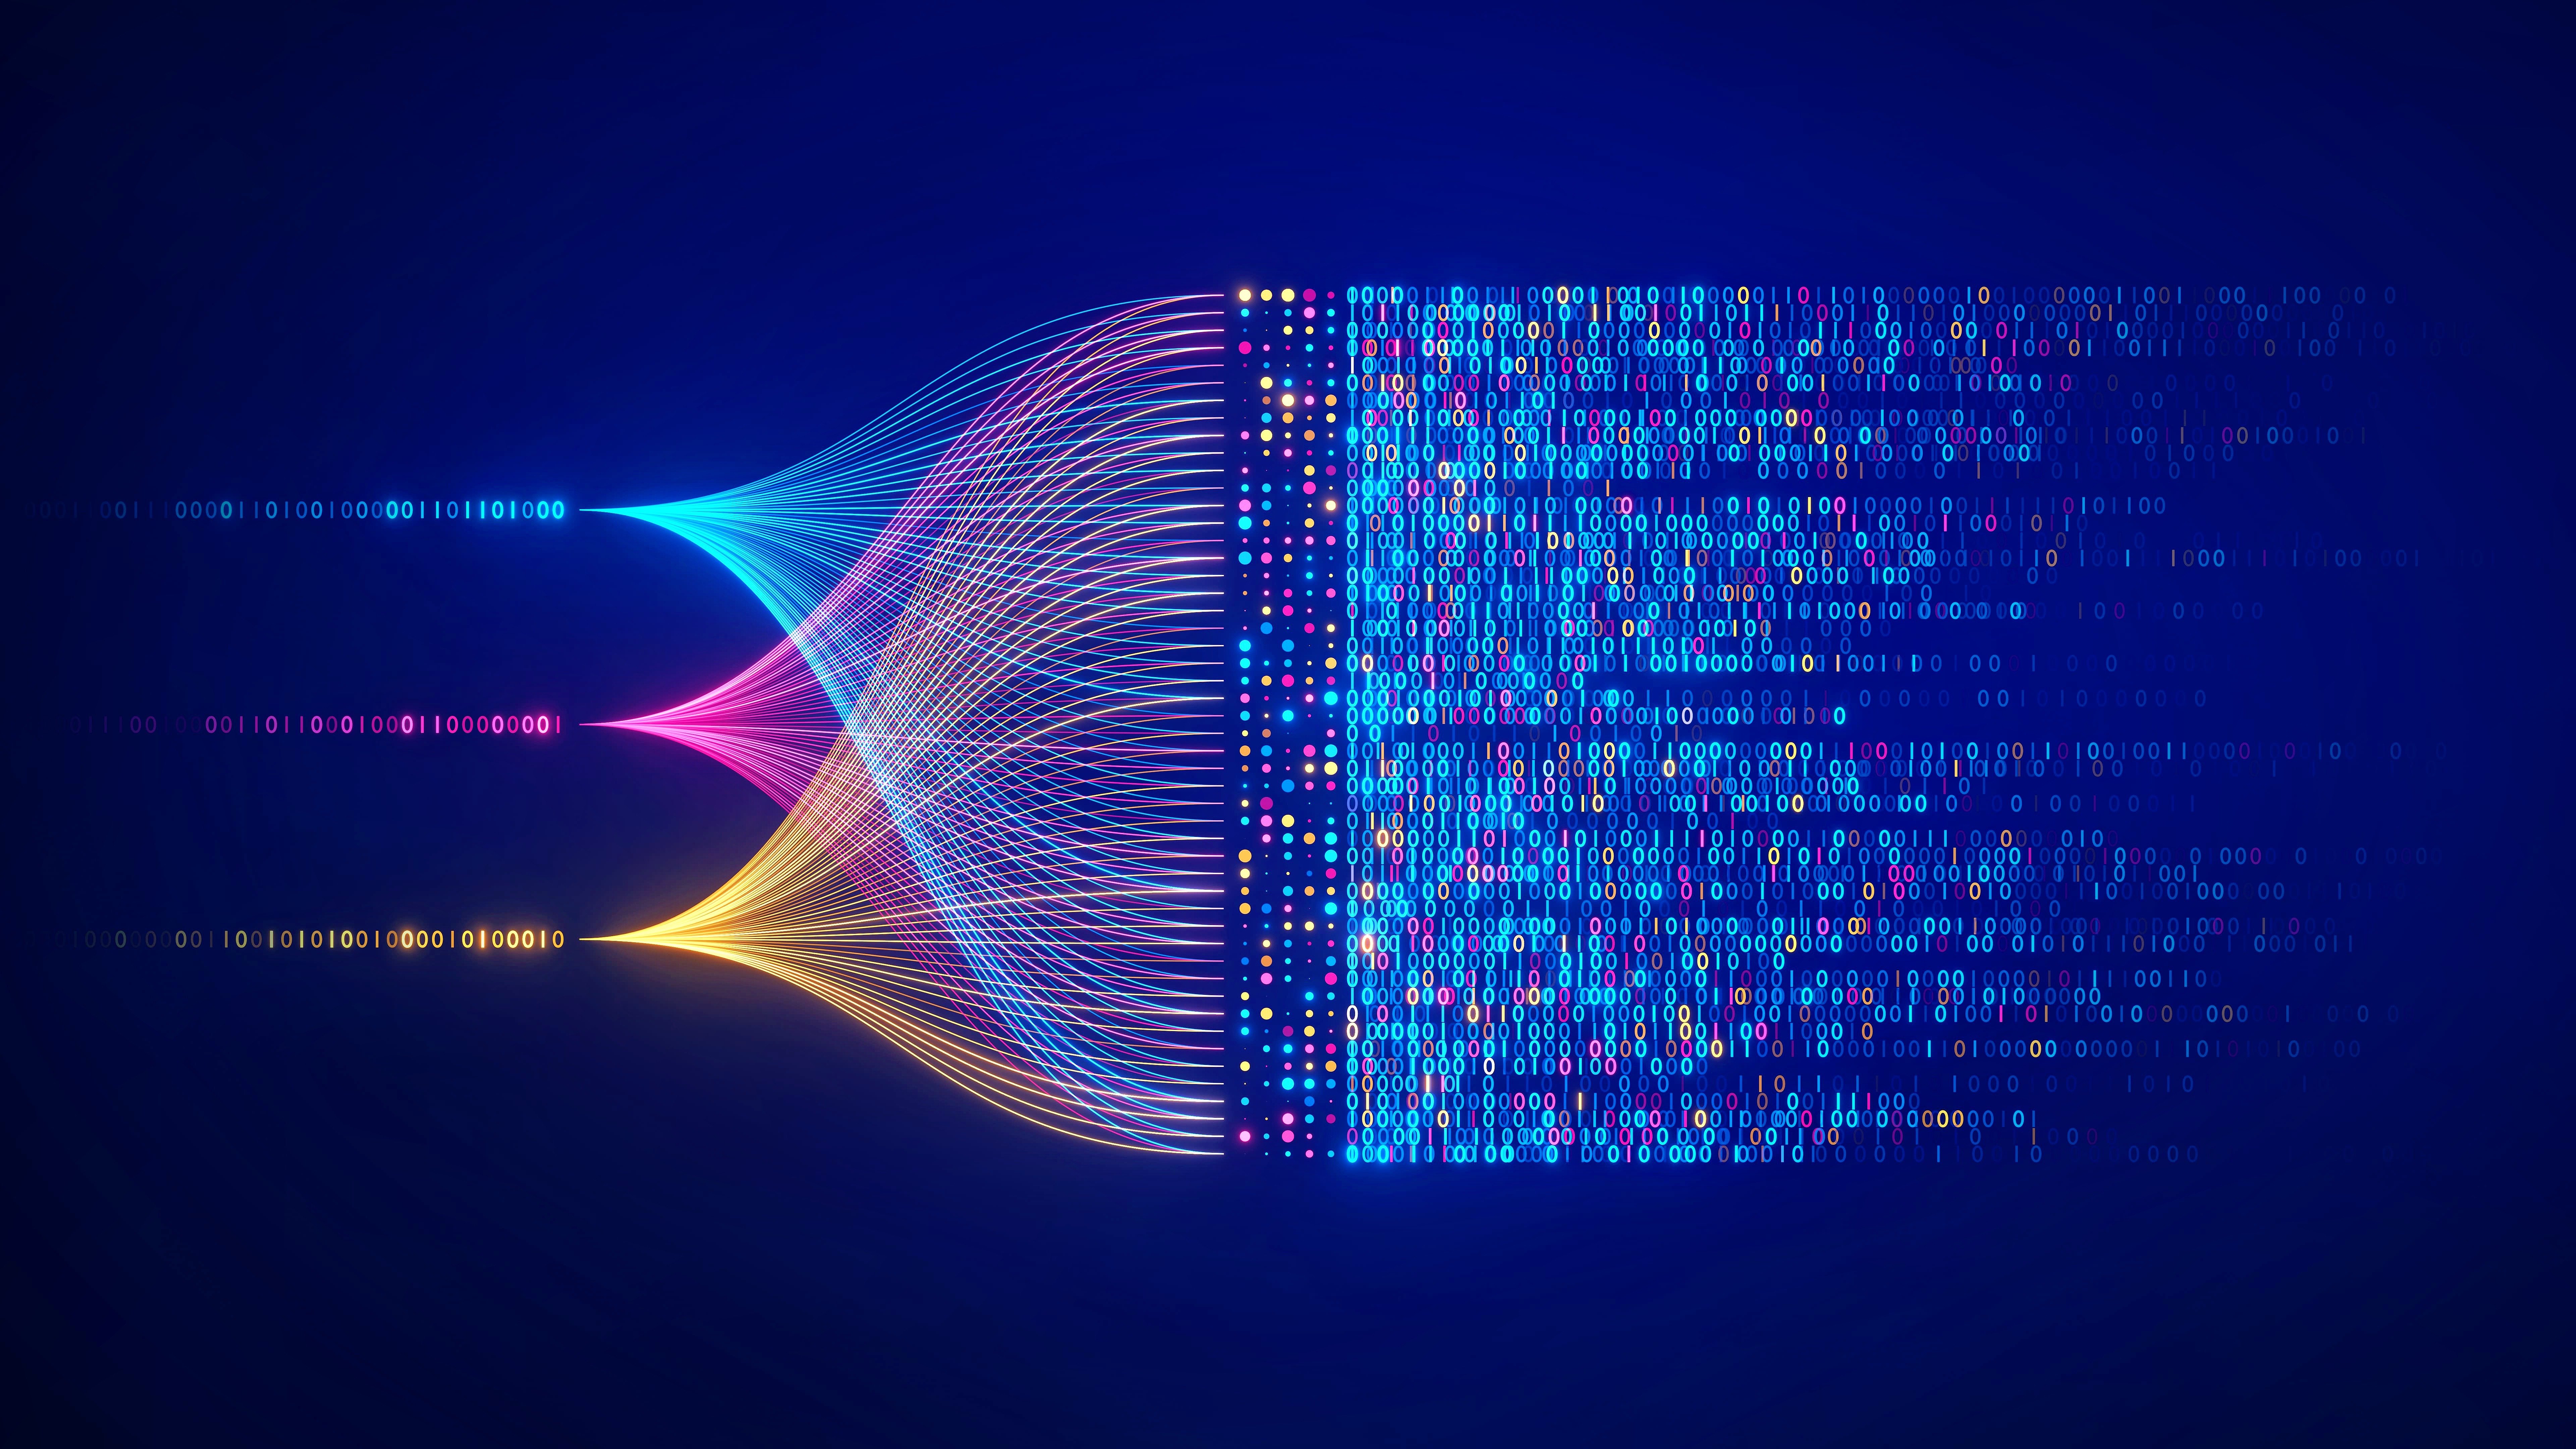 An abstract representation of data flow with colorful lines and binary code, symbolizing the continuous data protection solutions offered by Fast Fixx to minimize data loss and ensure business continuity